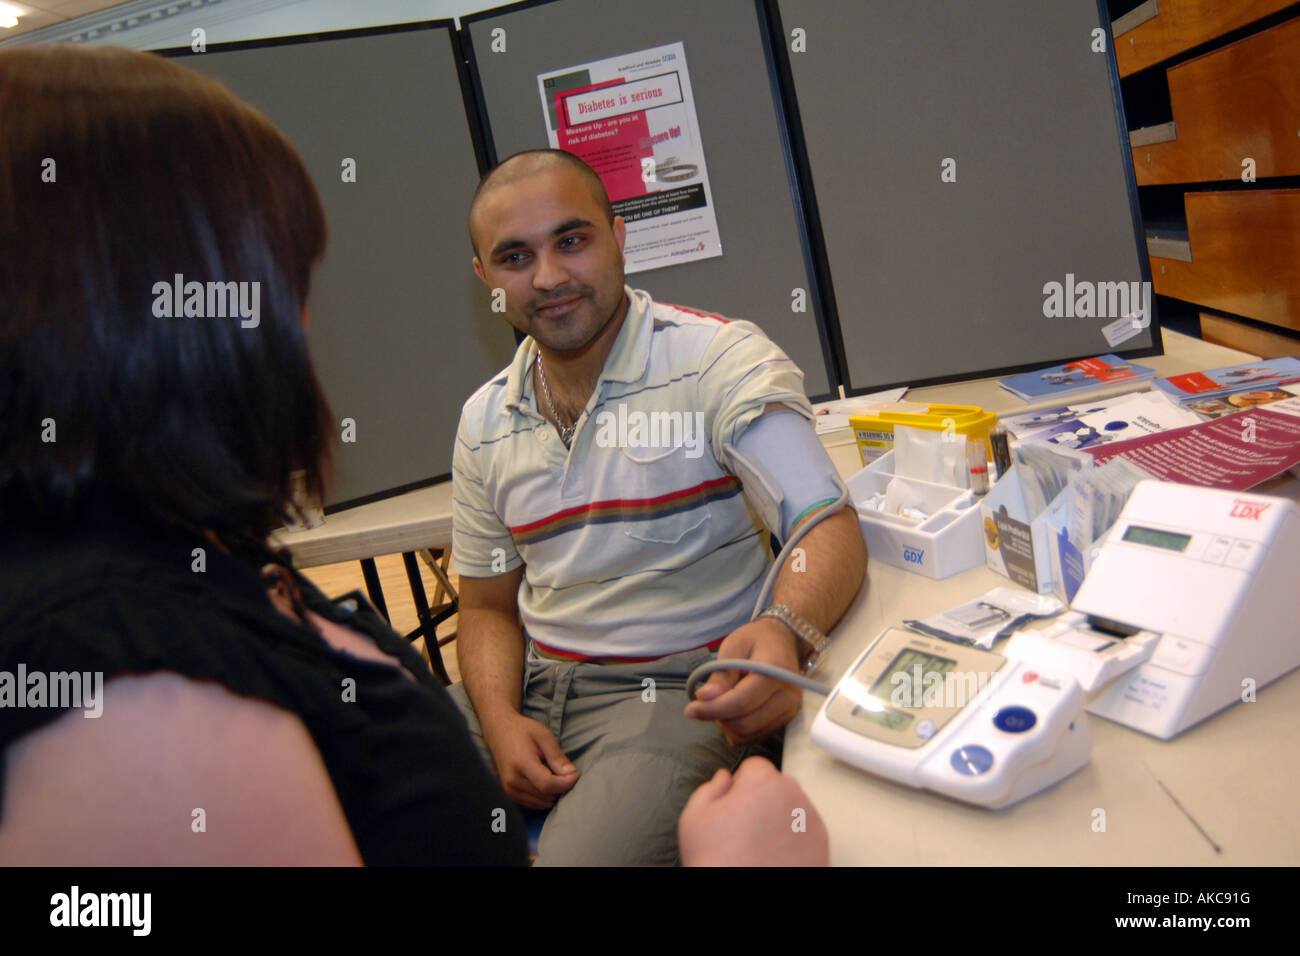 Members of the public attend a free health check to screen for diabetes Keighley, West Yorkshire. Stock Photo